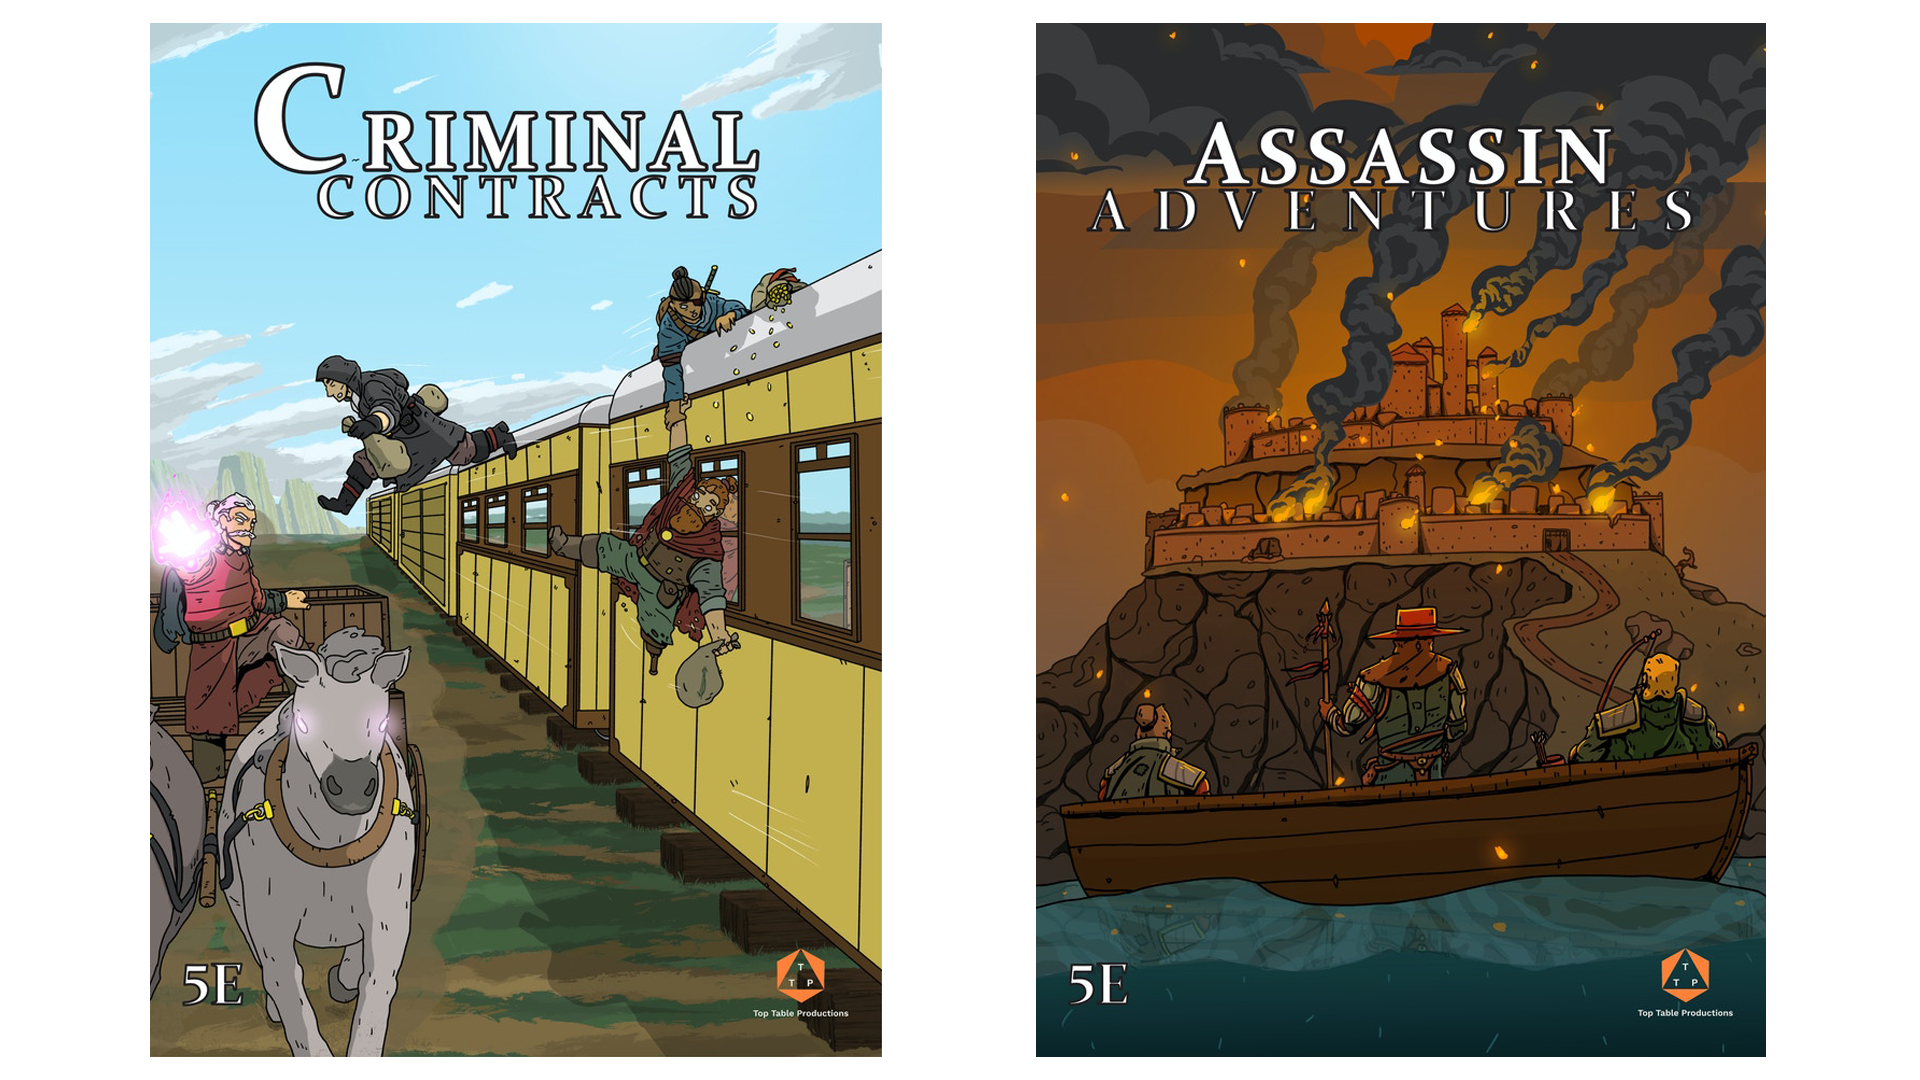 Assassin and Criminal Contracts RPG artwork